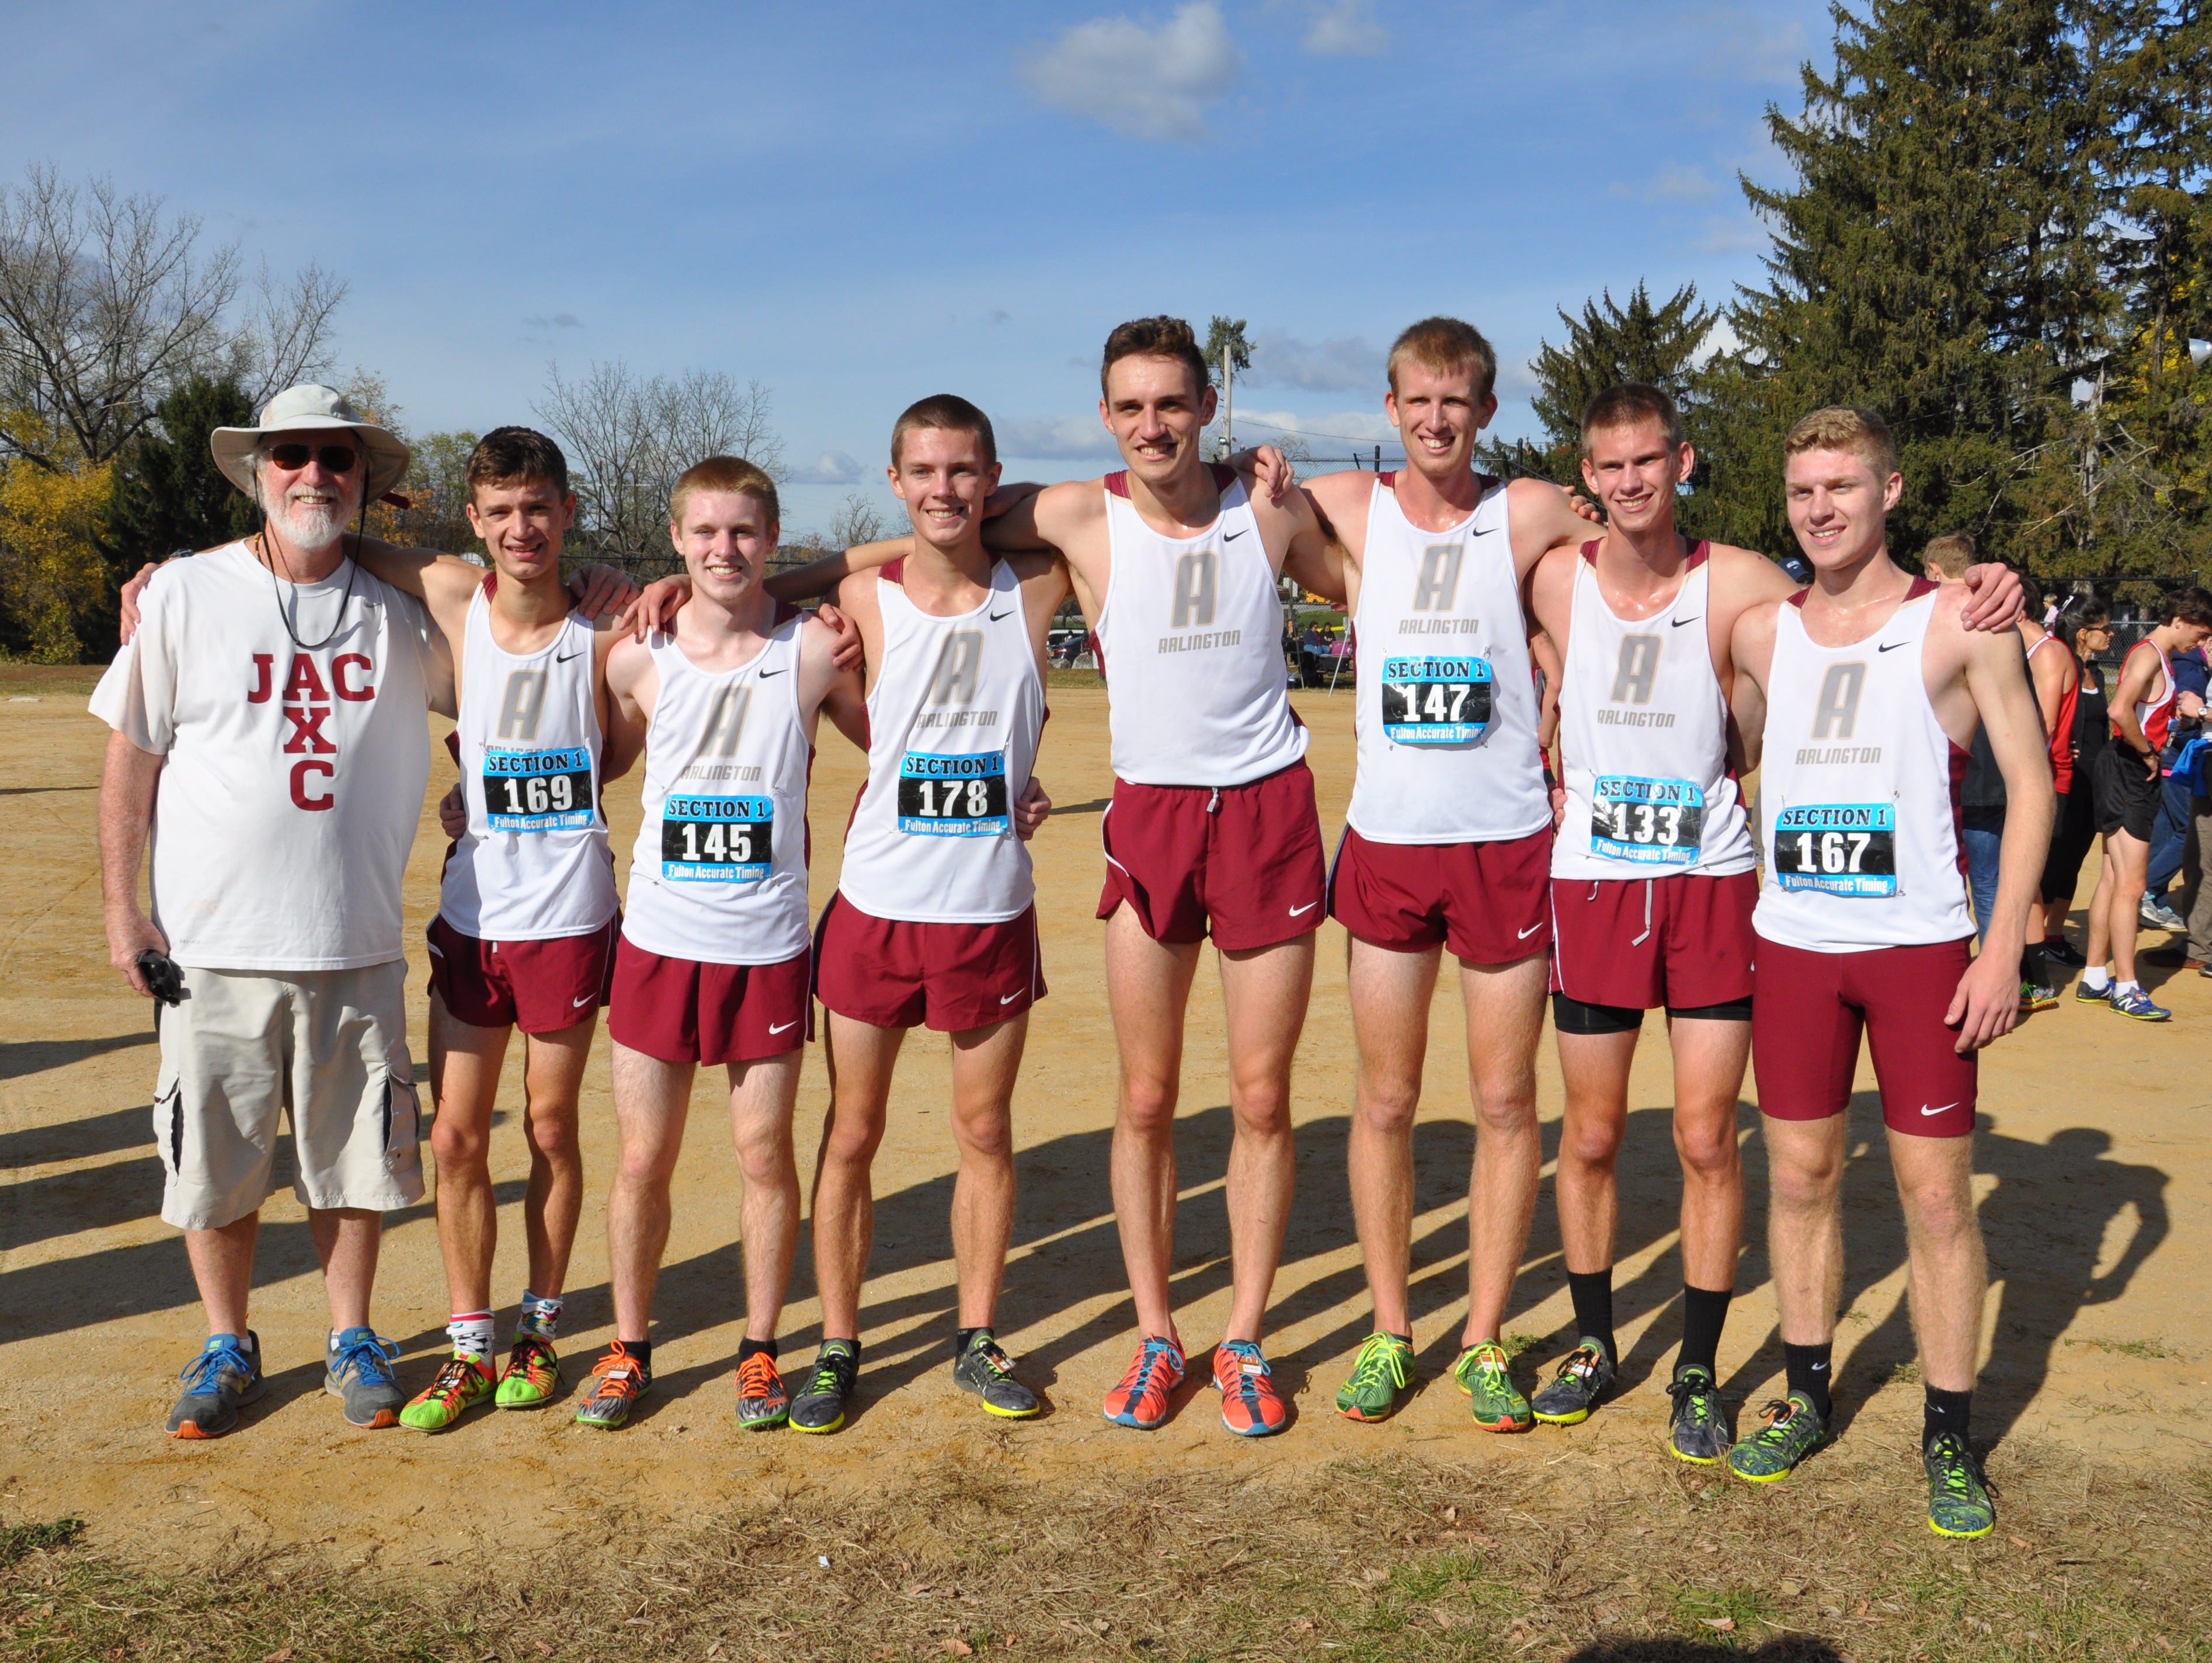 The Arlington High School boys cross country team poses together after winning the Section 1 Class A title at Bowdoin Park on Saturday.